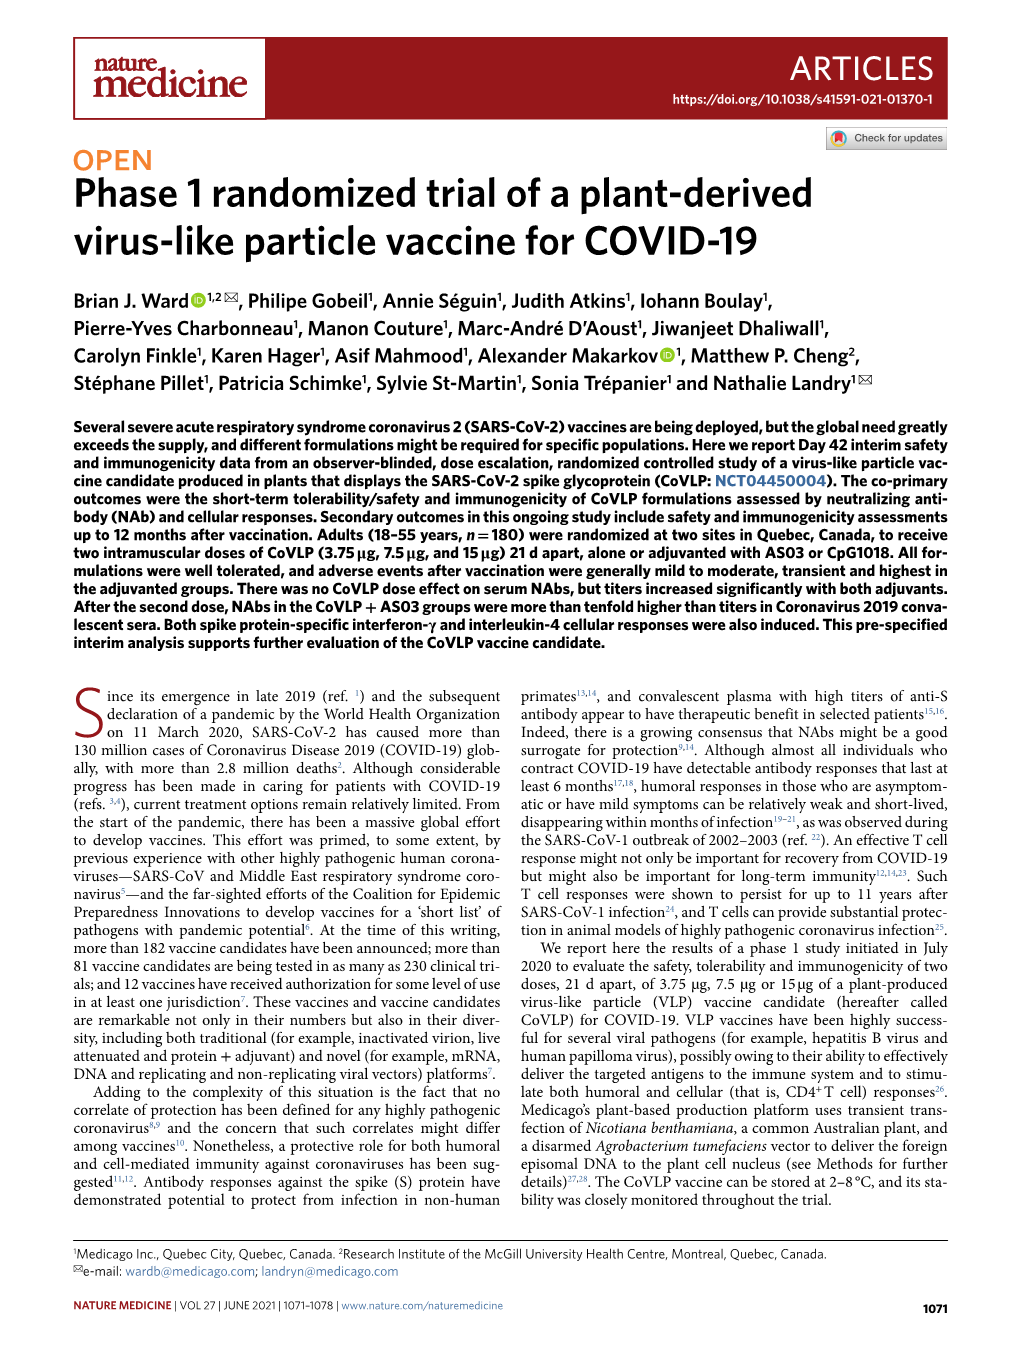 Phase 1 Randomized Trial of a Plant-Derived Virus-Like Particle Vaccine for COVID-19